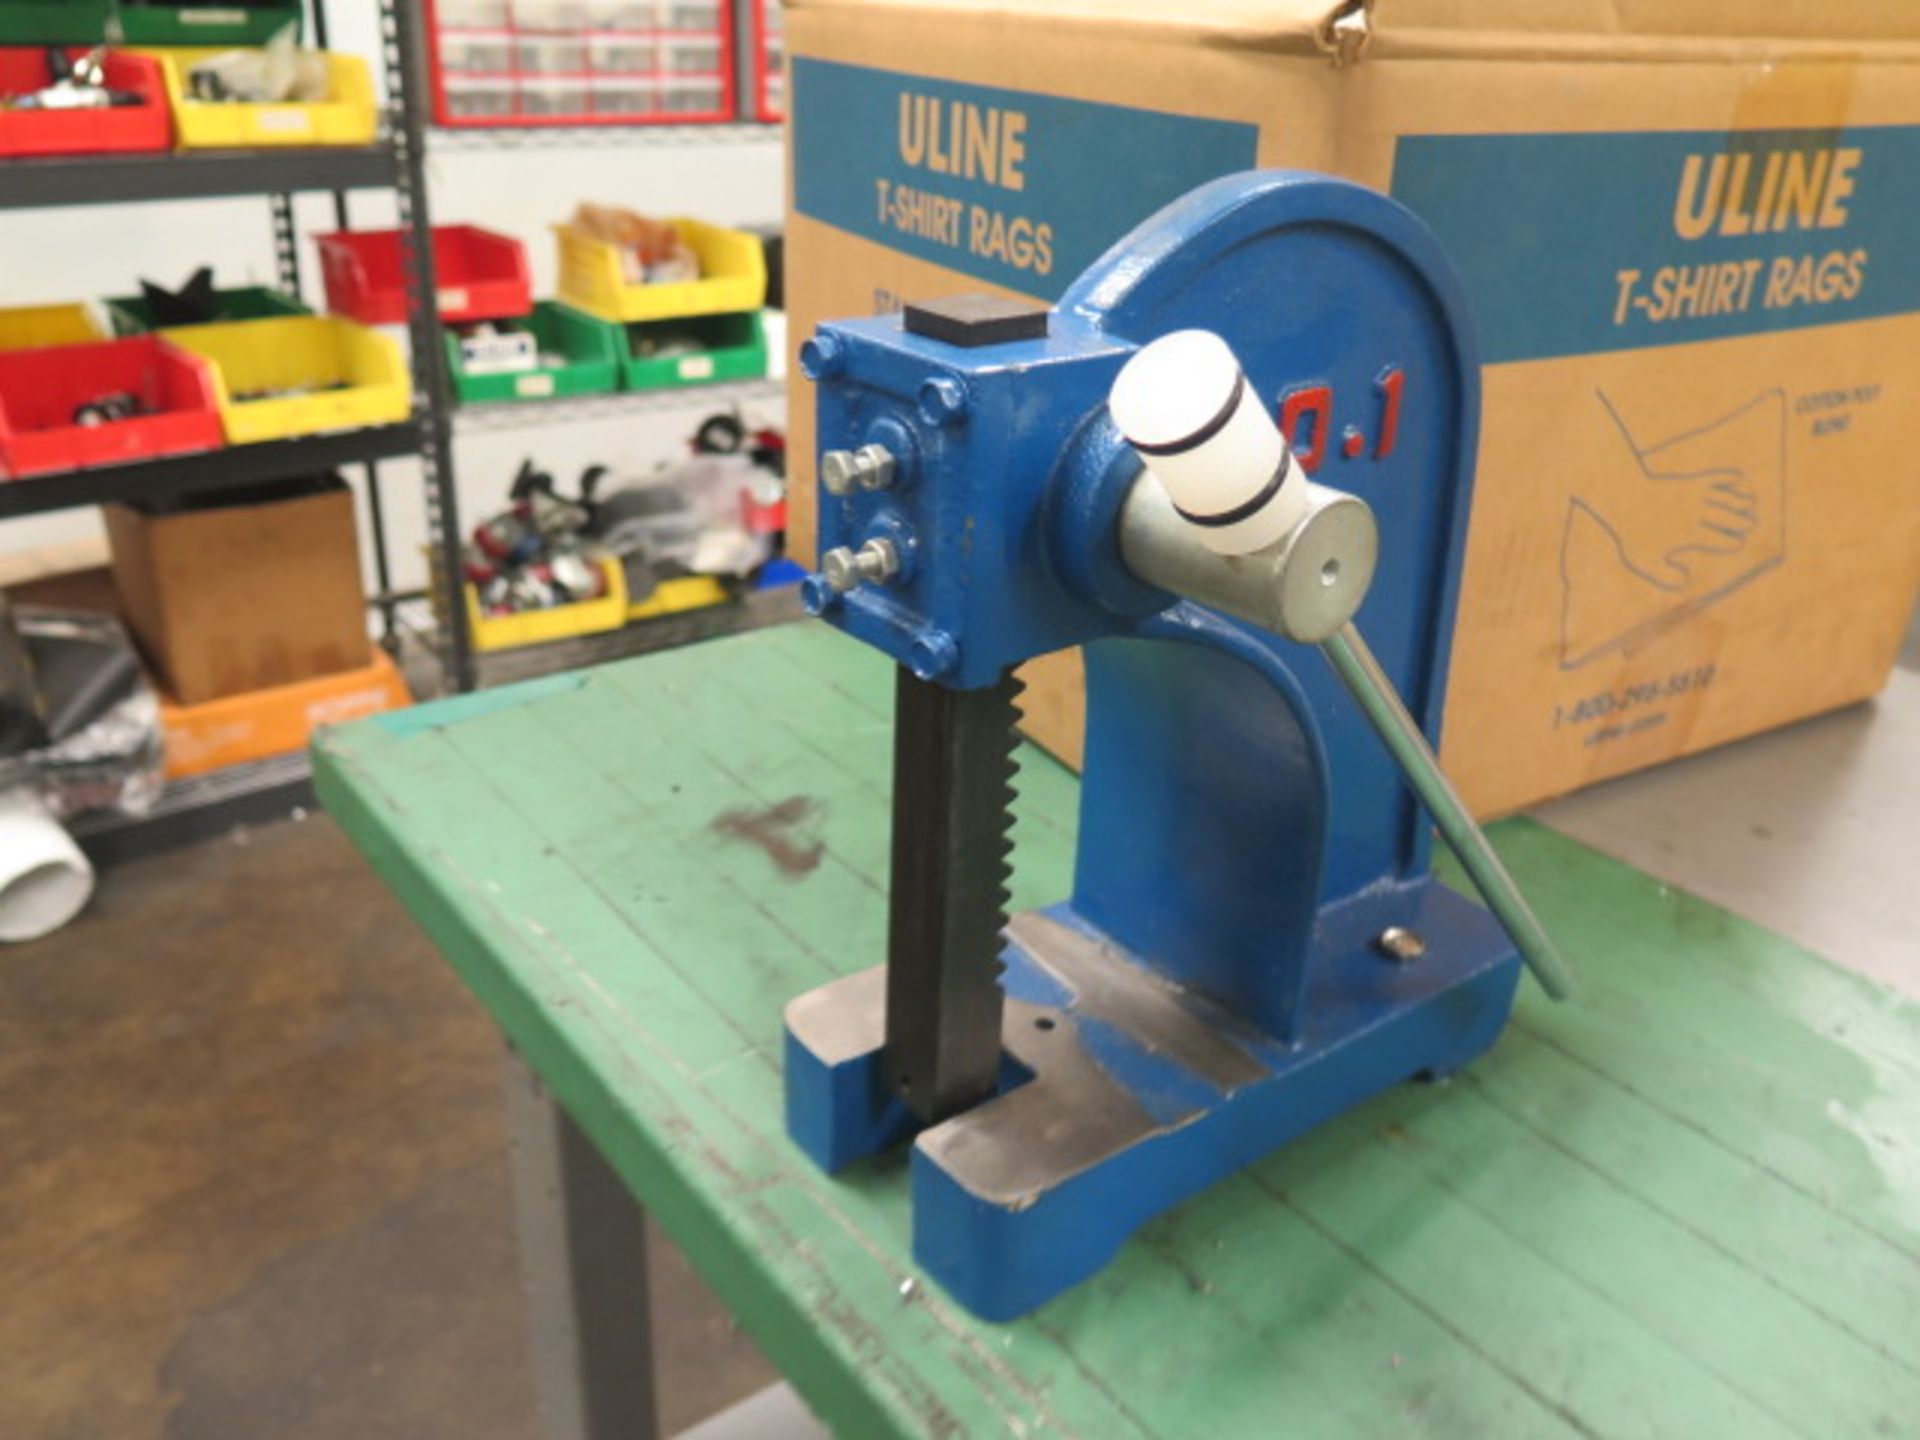 Uline Steel Work bench w/ Bench Vise and Arbor Press (SOLD AS-IS - NO WARRANTY) - Image 4 of 6